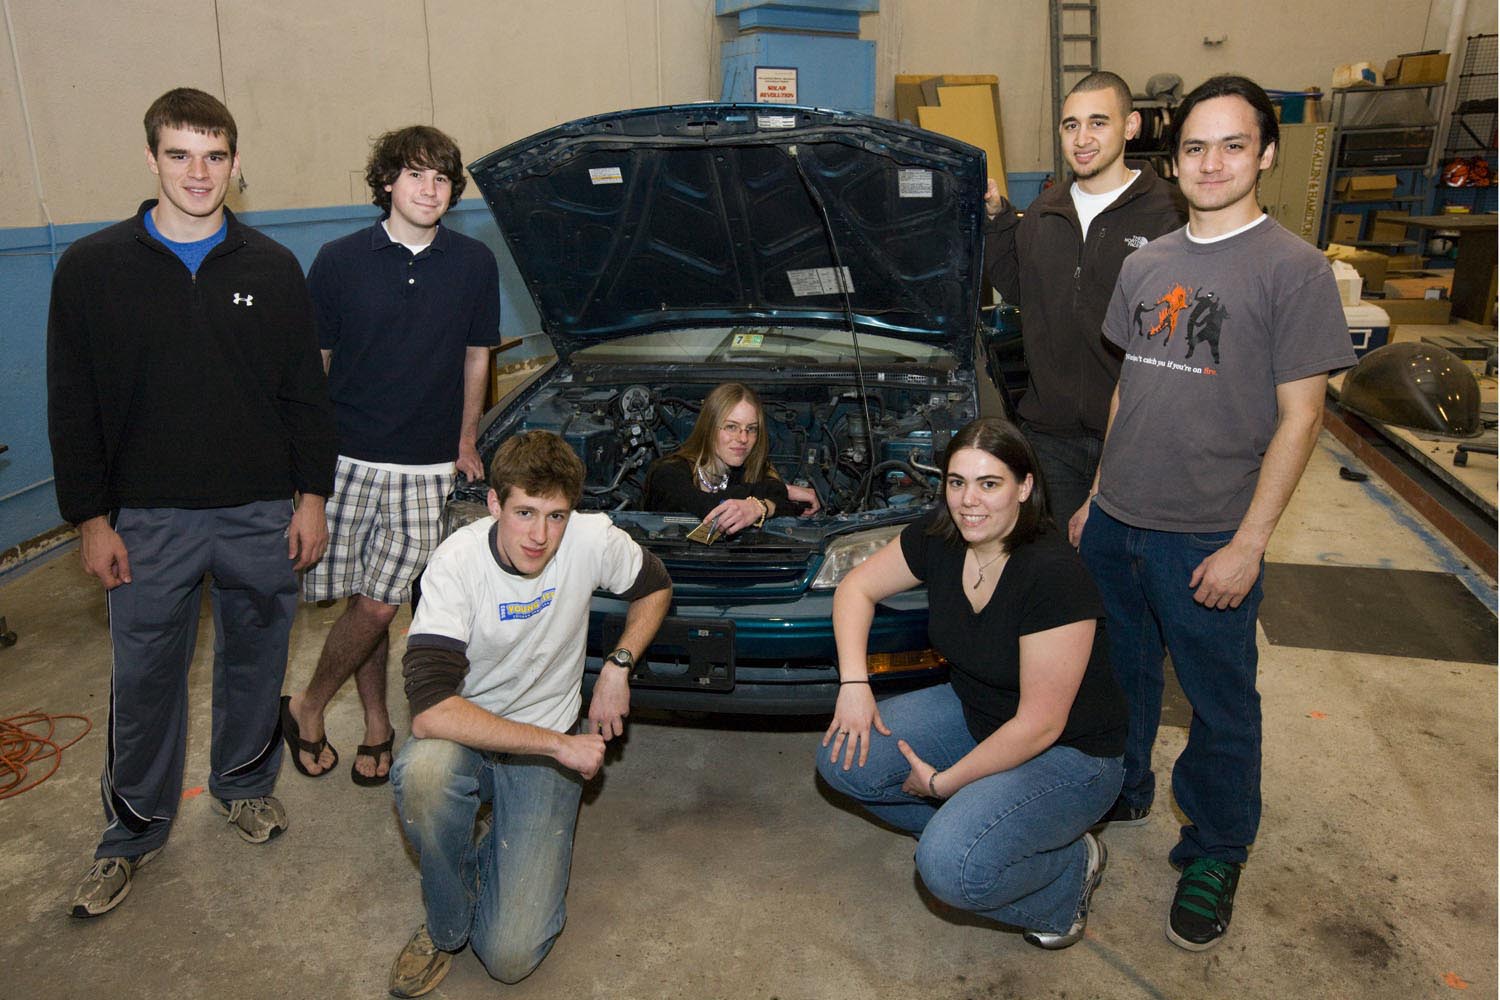 Group of students stand in front of a car in a repair shop